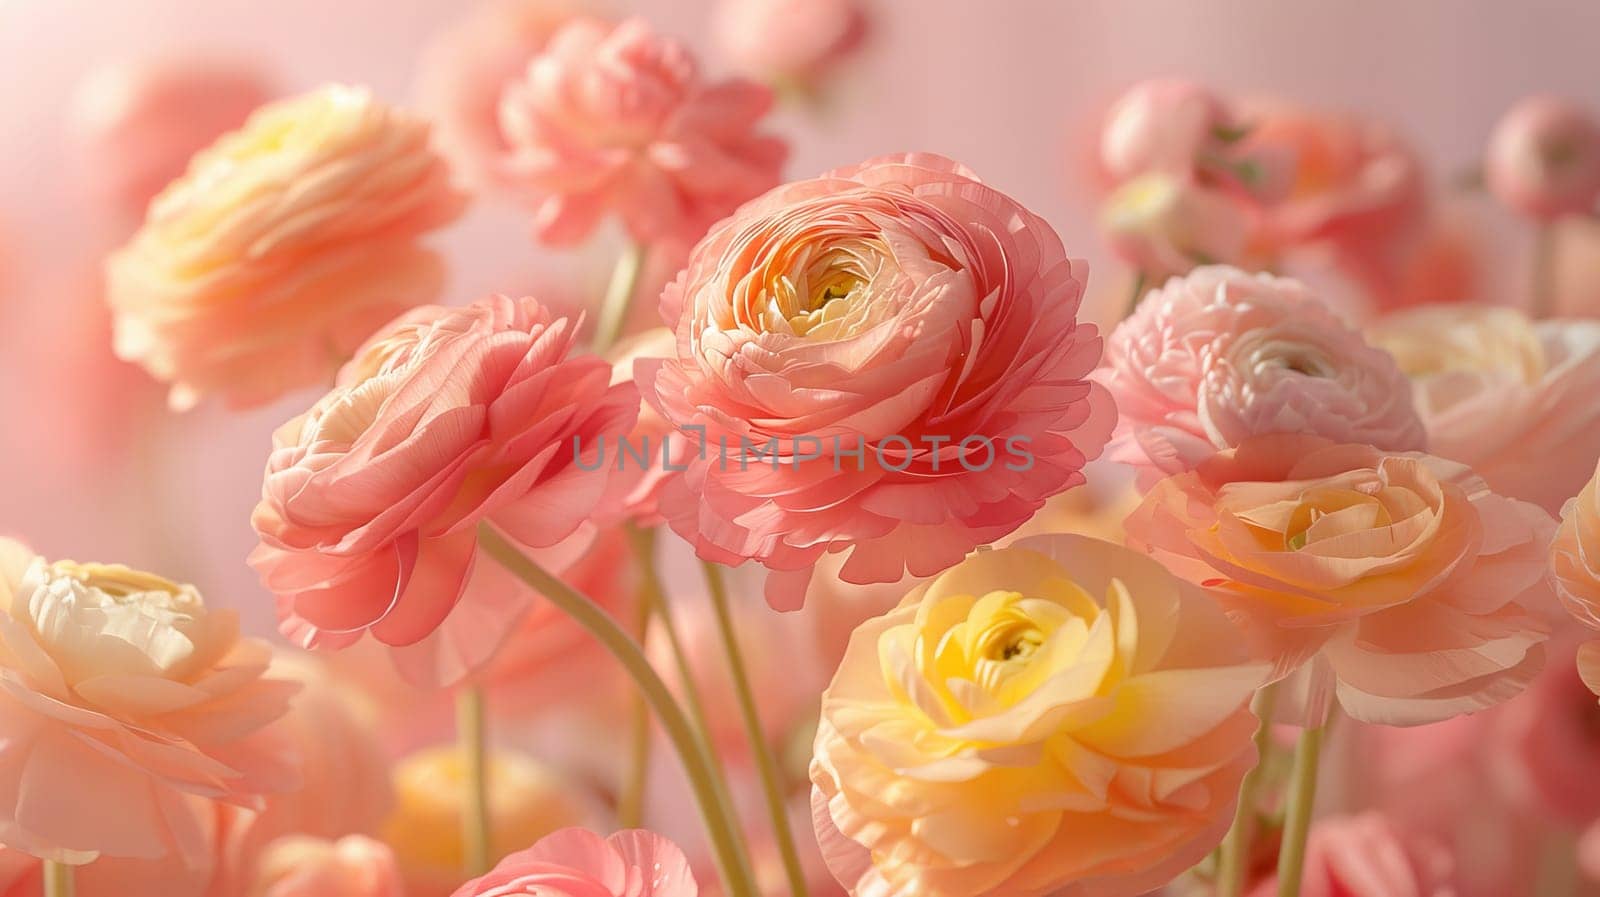 A bouquet of pink and yellow flowers with a pink background. The flowers are arranged in a way that they look like they are in a vase. Scene is cheerful and bright